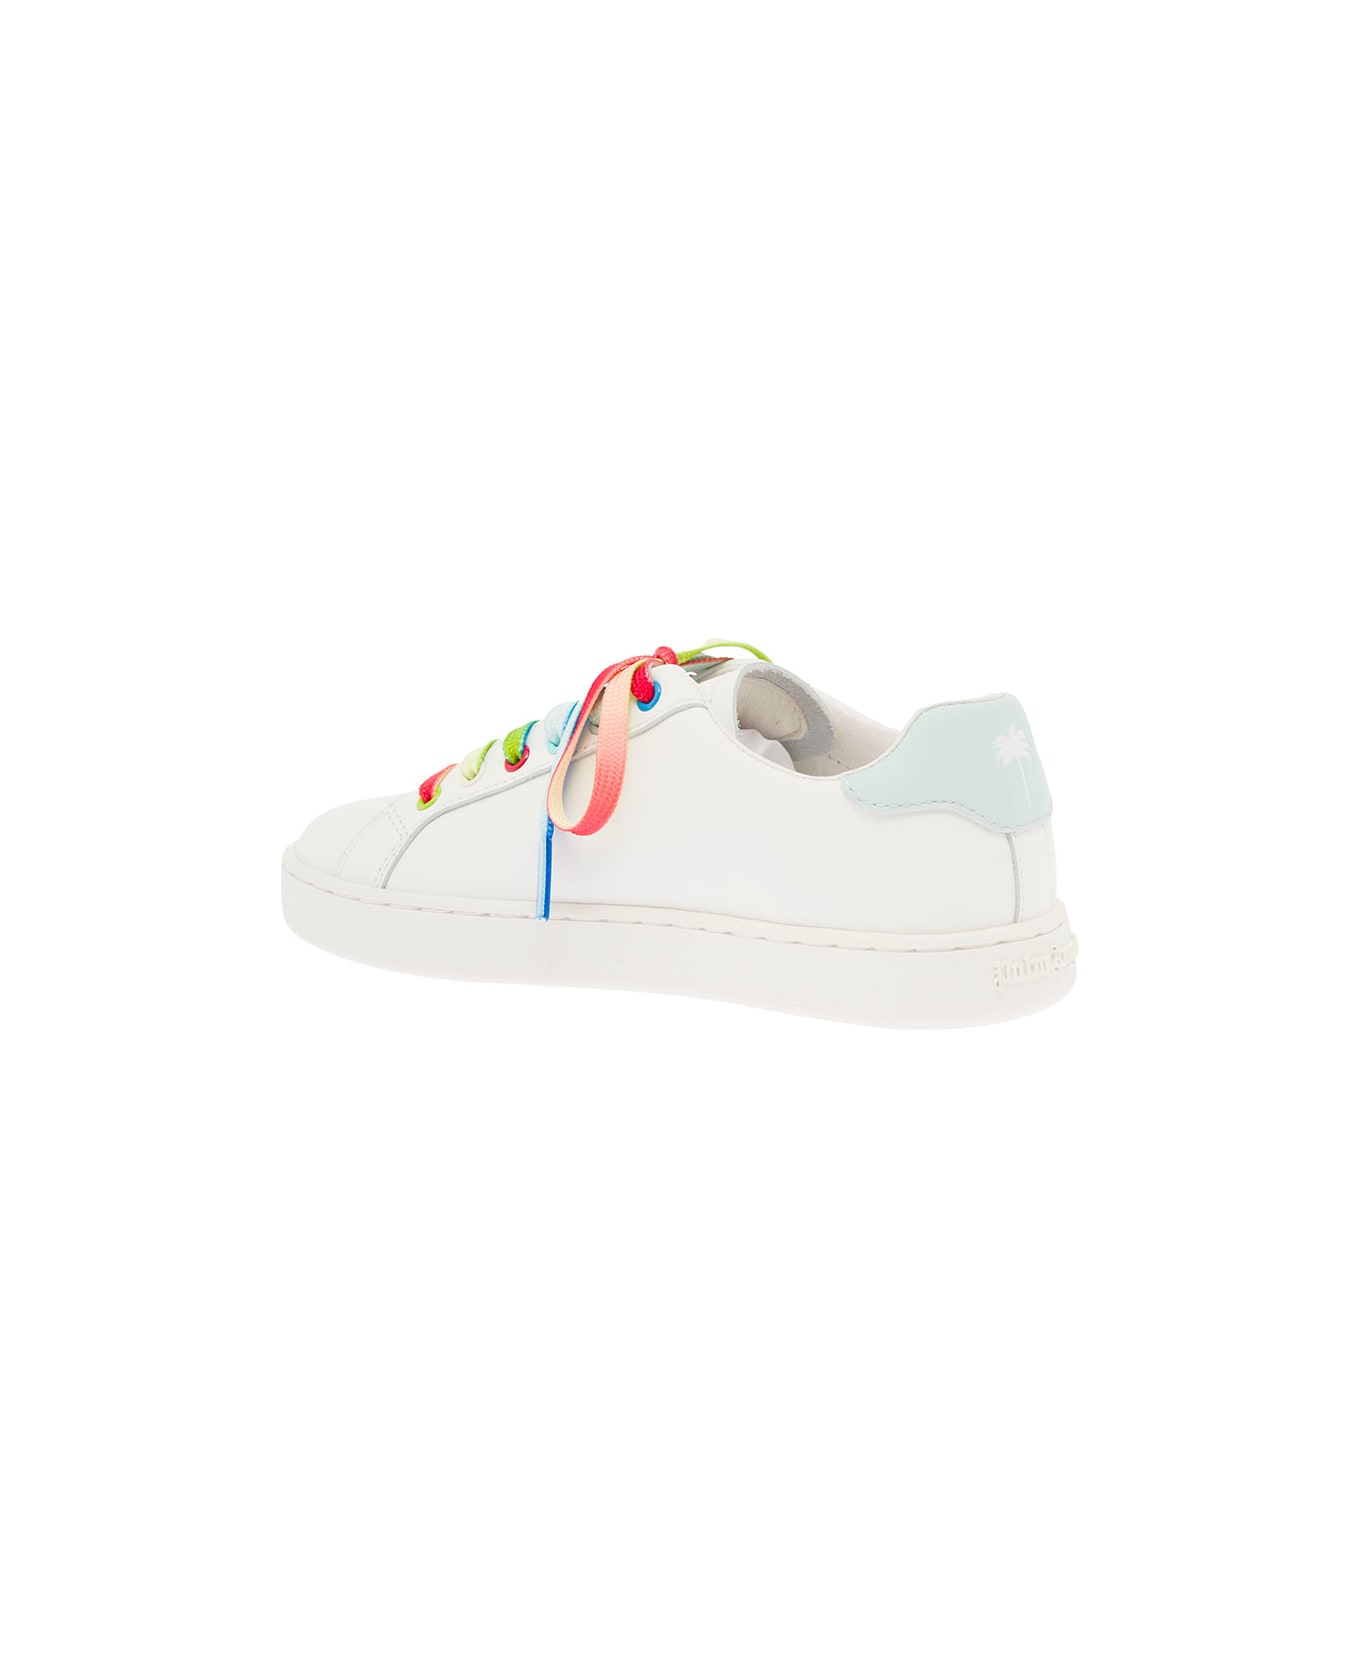 Palm Angels Kids Boy's White Leather Sneakers With Multicolor Laces - White シューズ